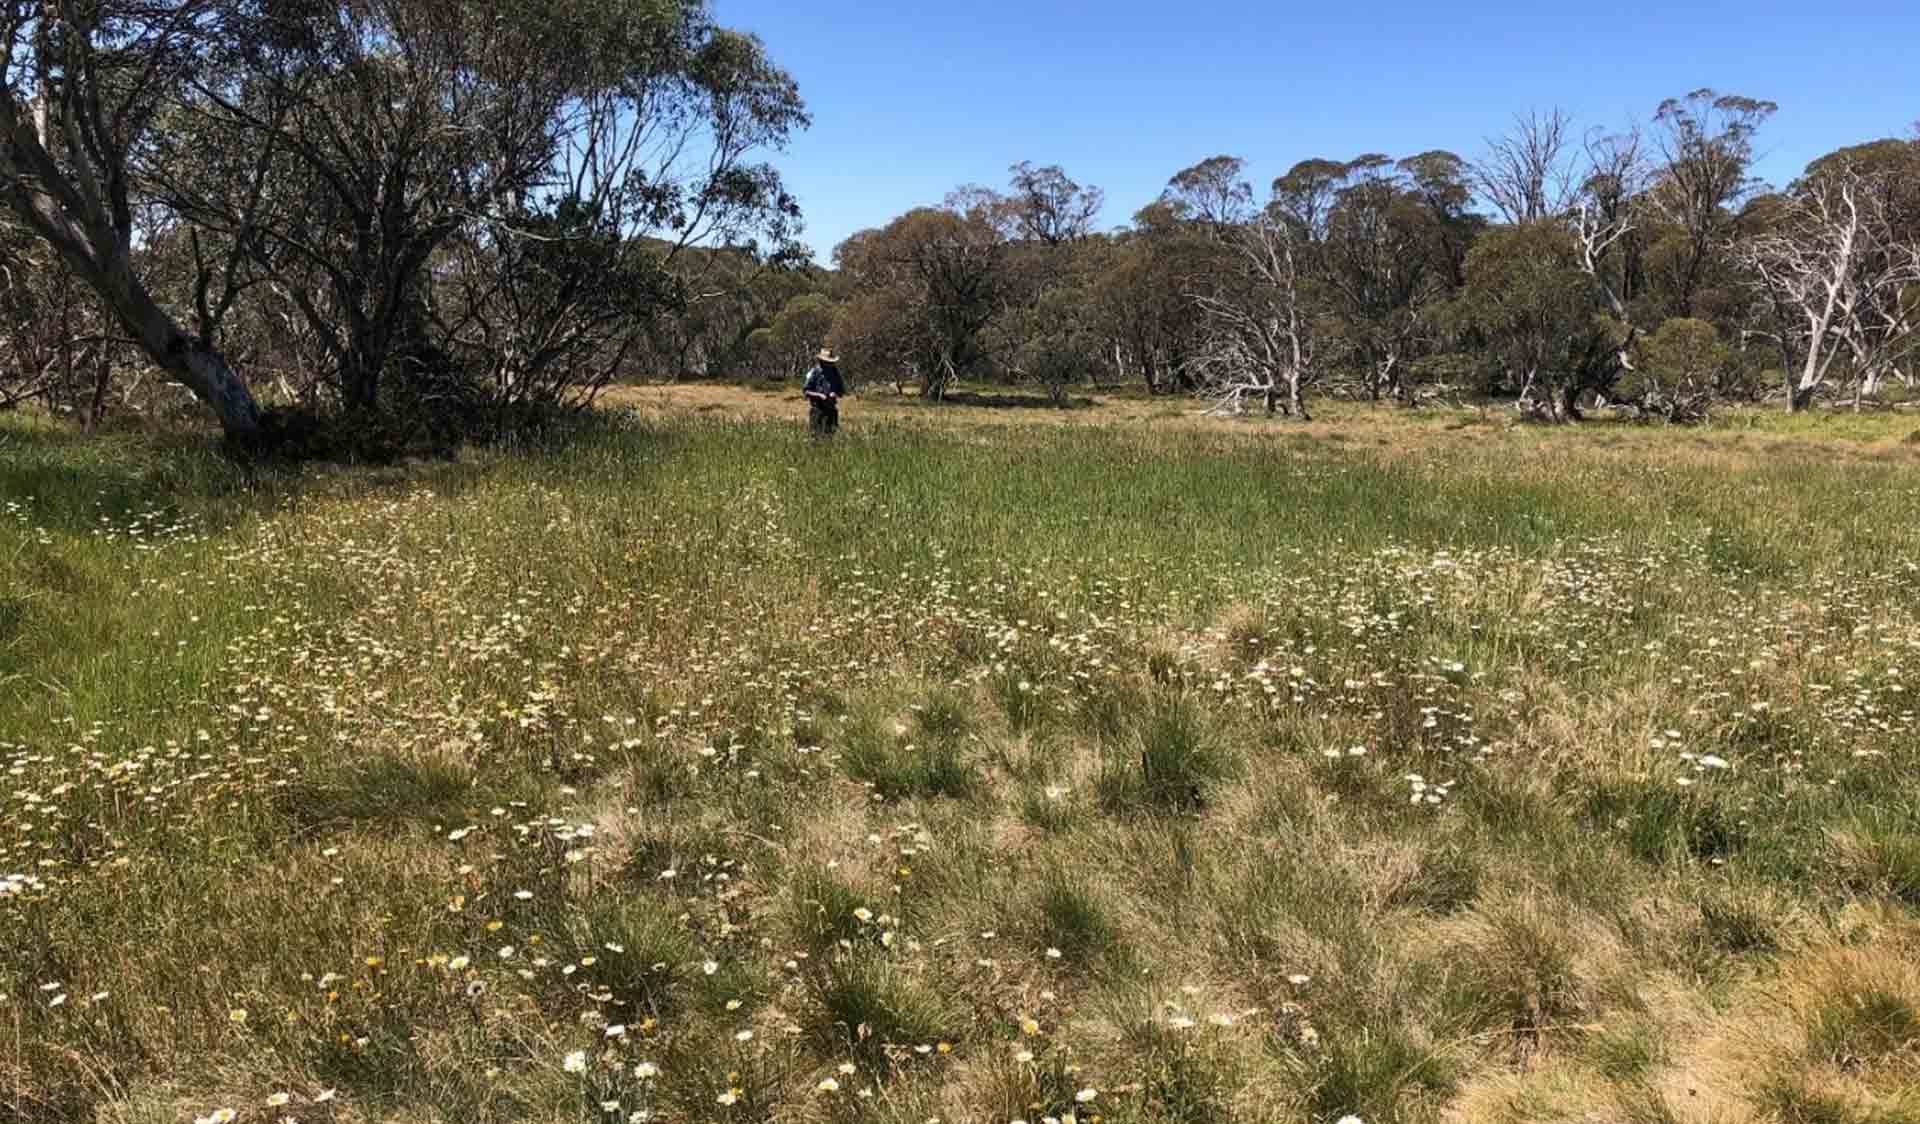 Parks Victoria staff in a field surveying Ox-eye daisy (weed) in the Alpine National Park